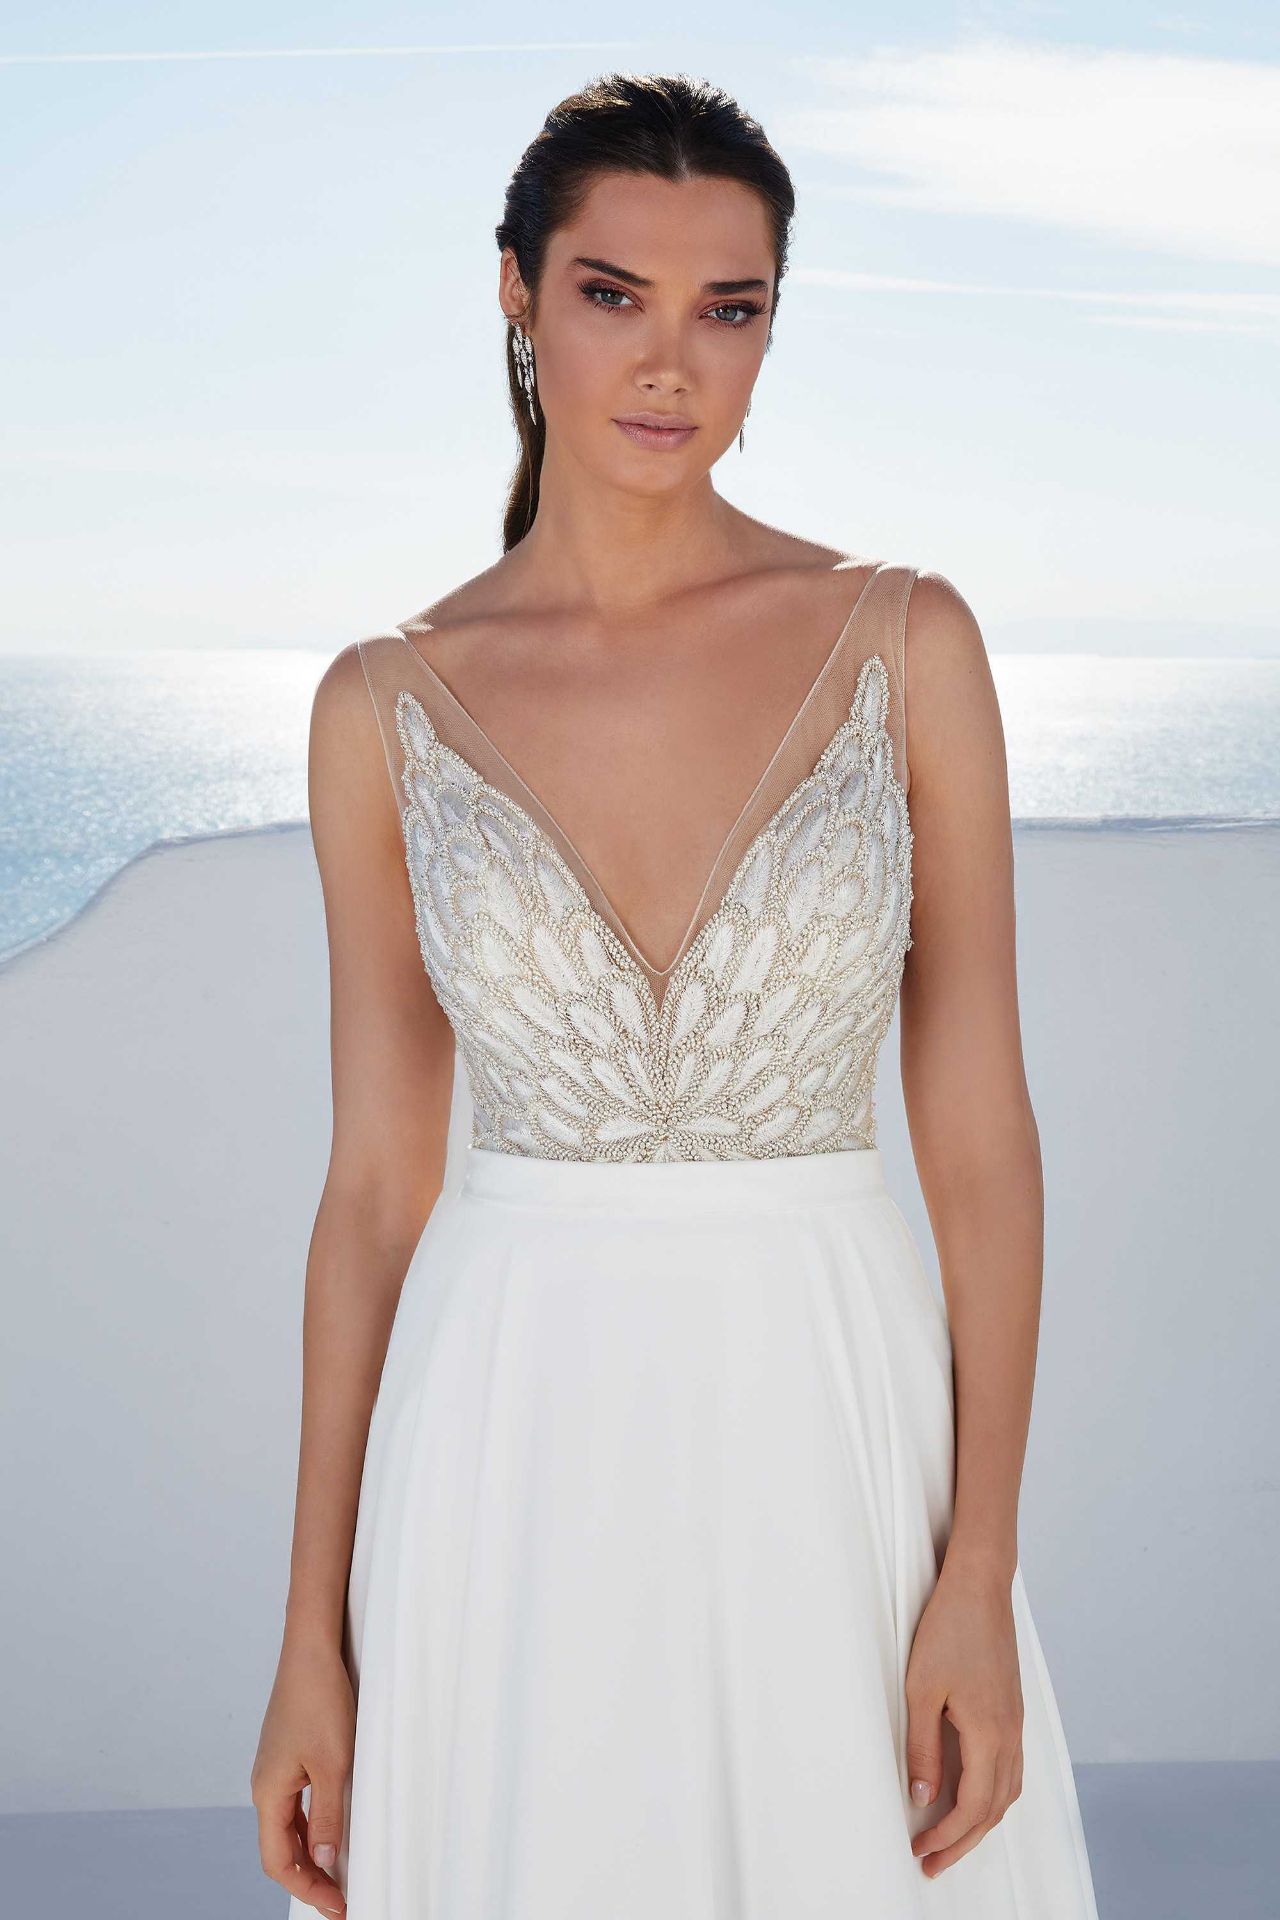 1 x Justin Alexander Wedding Dress With A Beaded Illusion V-Neckline Bodice - Size 12 - RRP £1,725 - Image 2 of 9